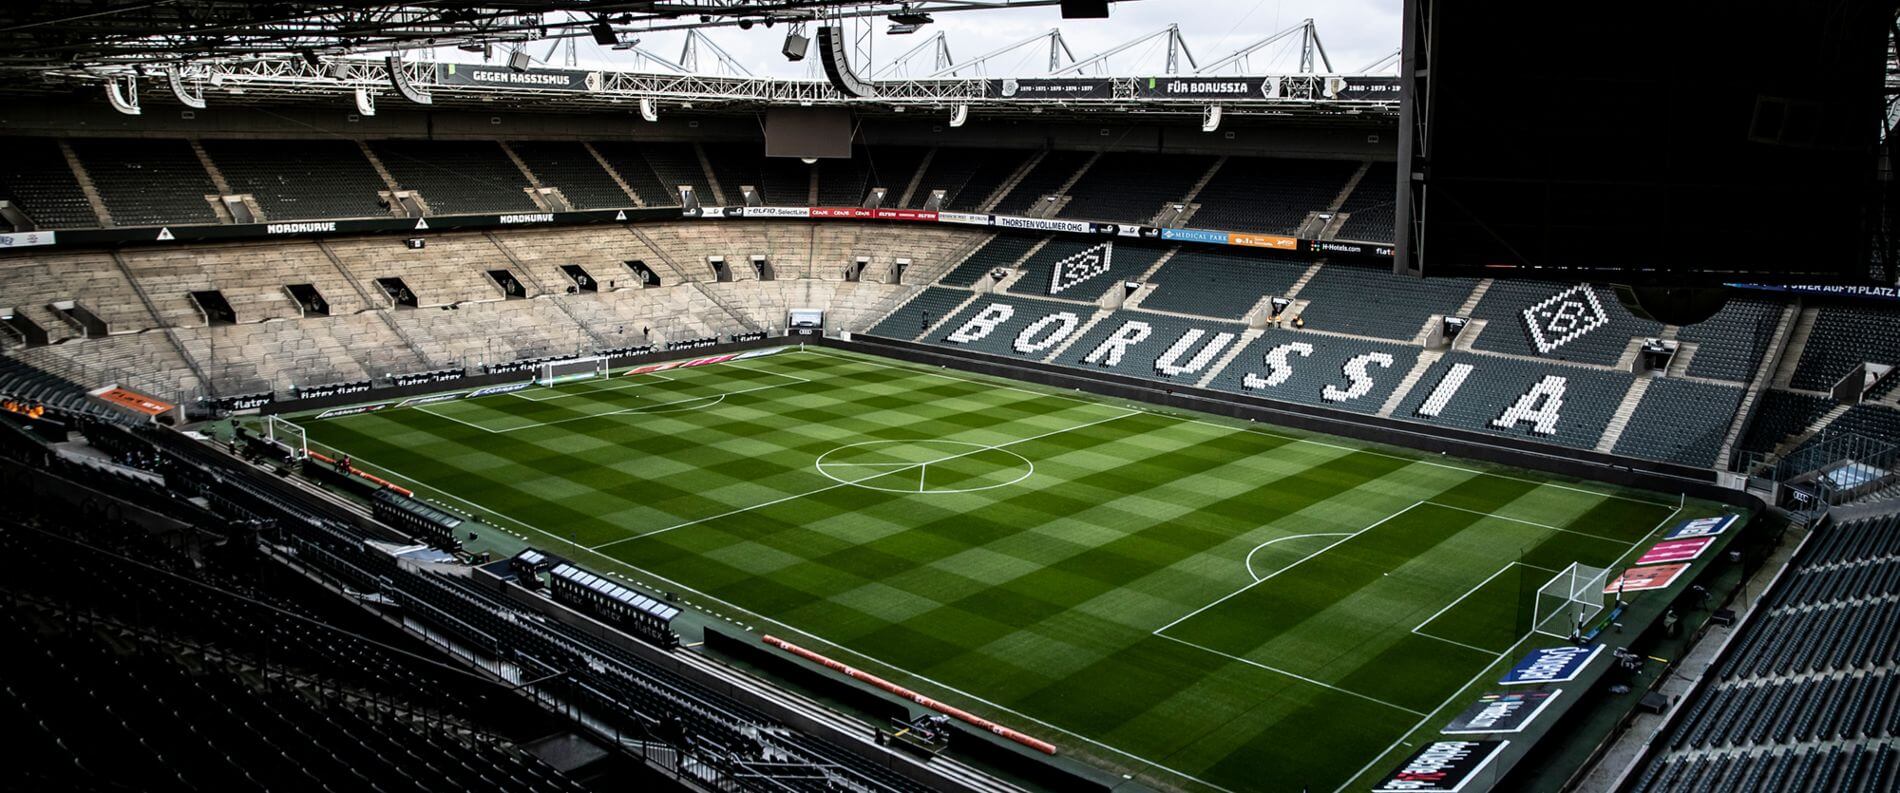 10-mind-blowing-facts-about-borussia-park